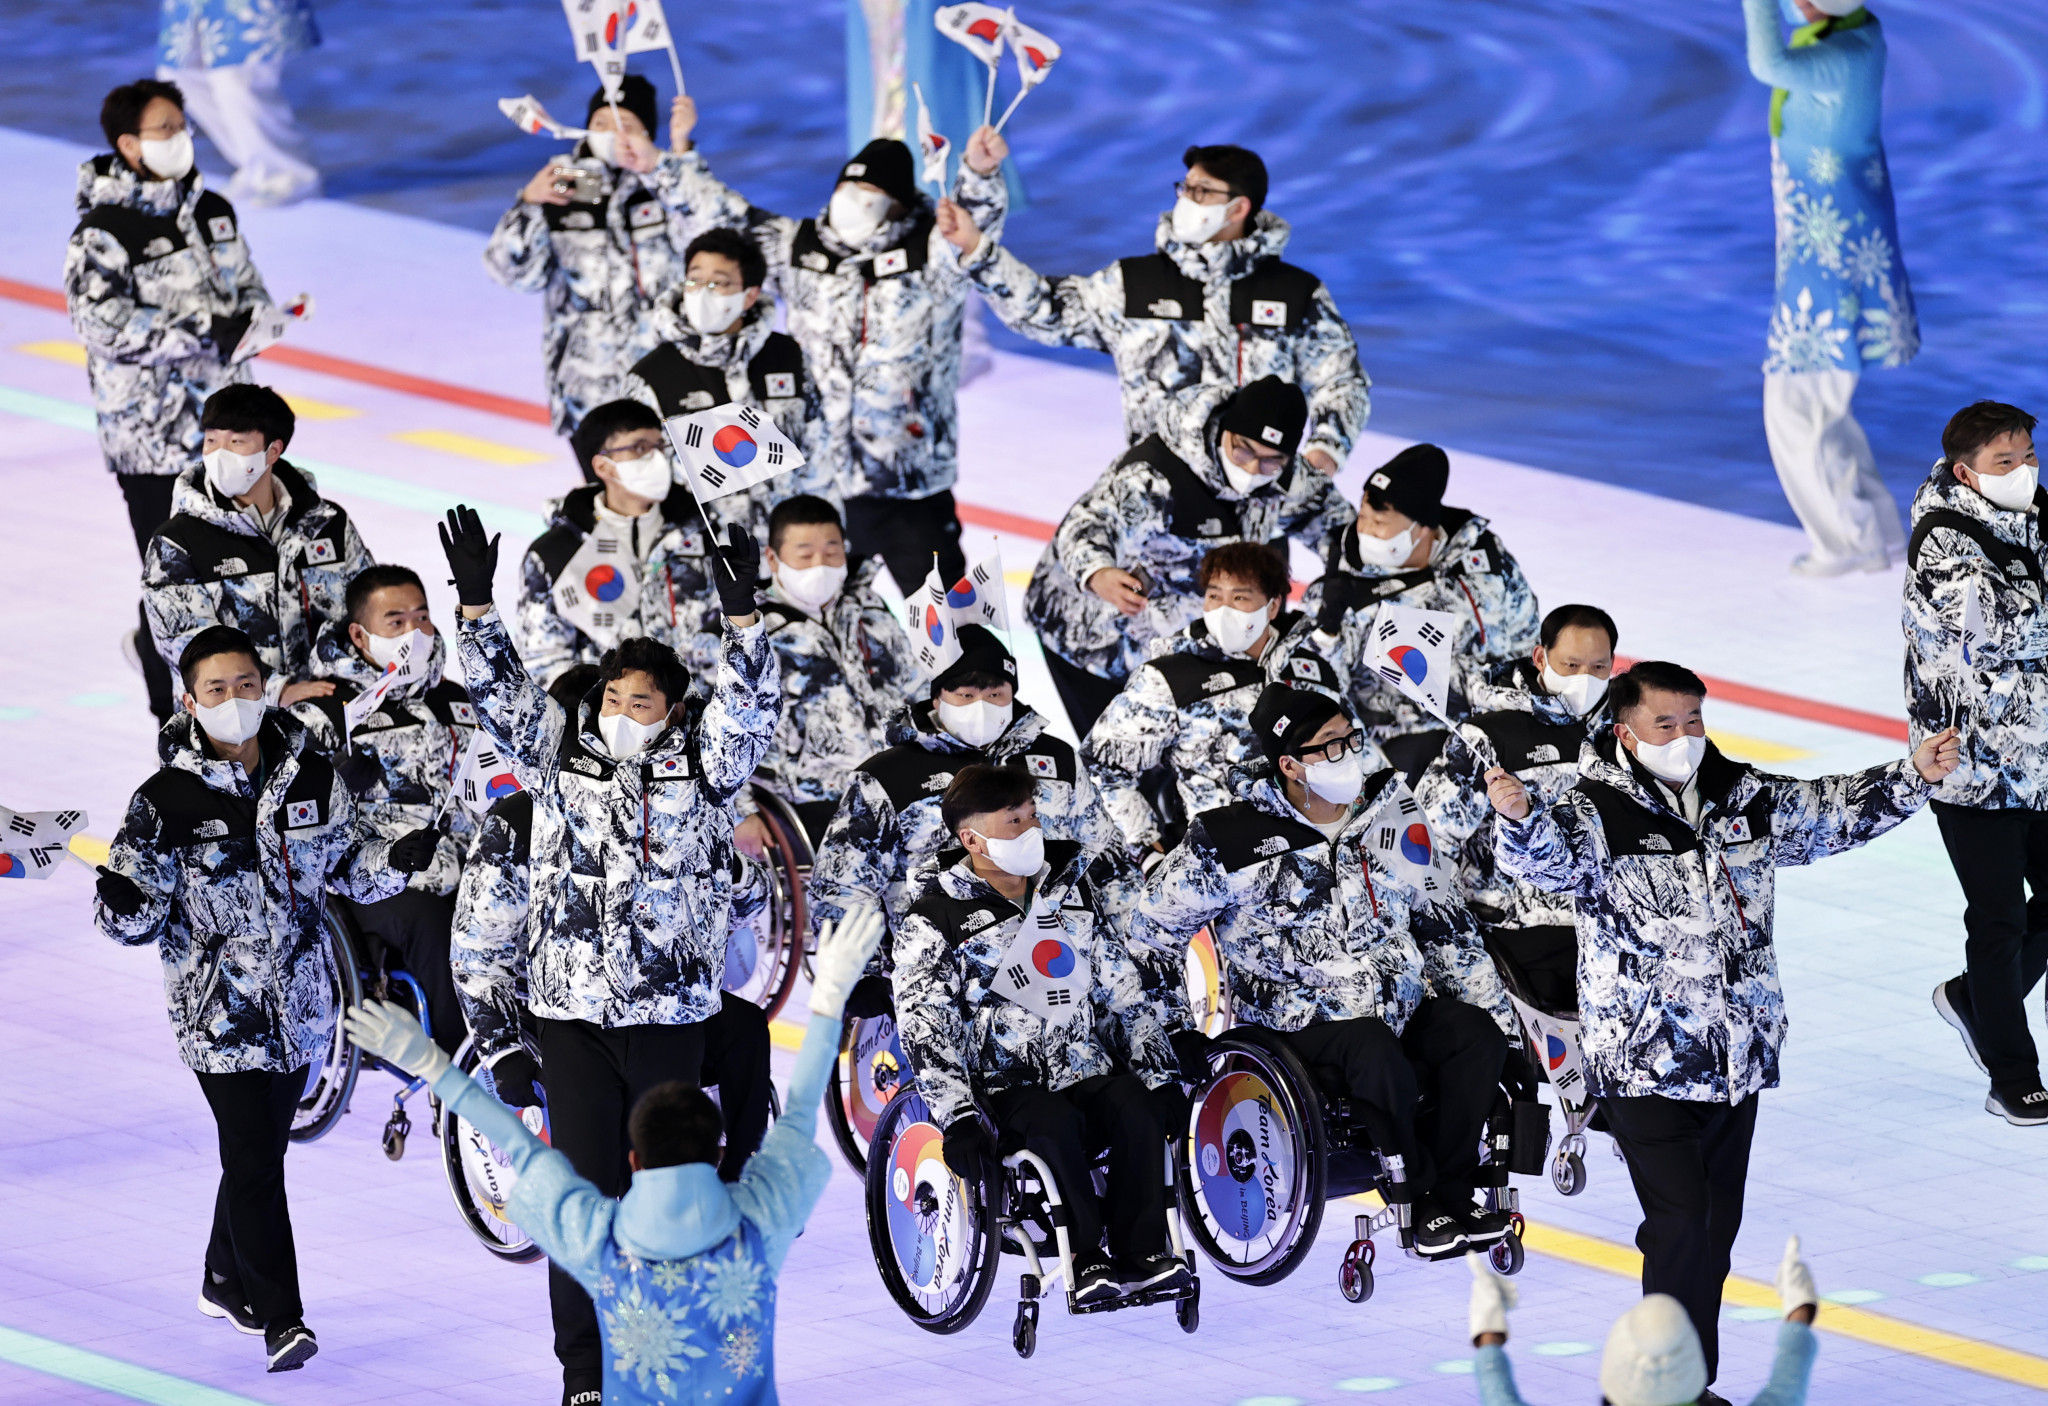 The IPC wants its NPCs to develop the quality and number of Paralympians ©Getty Images